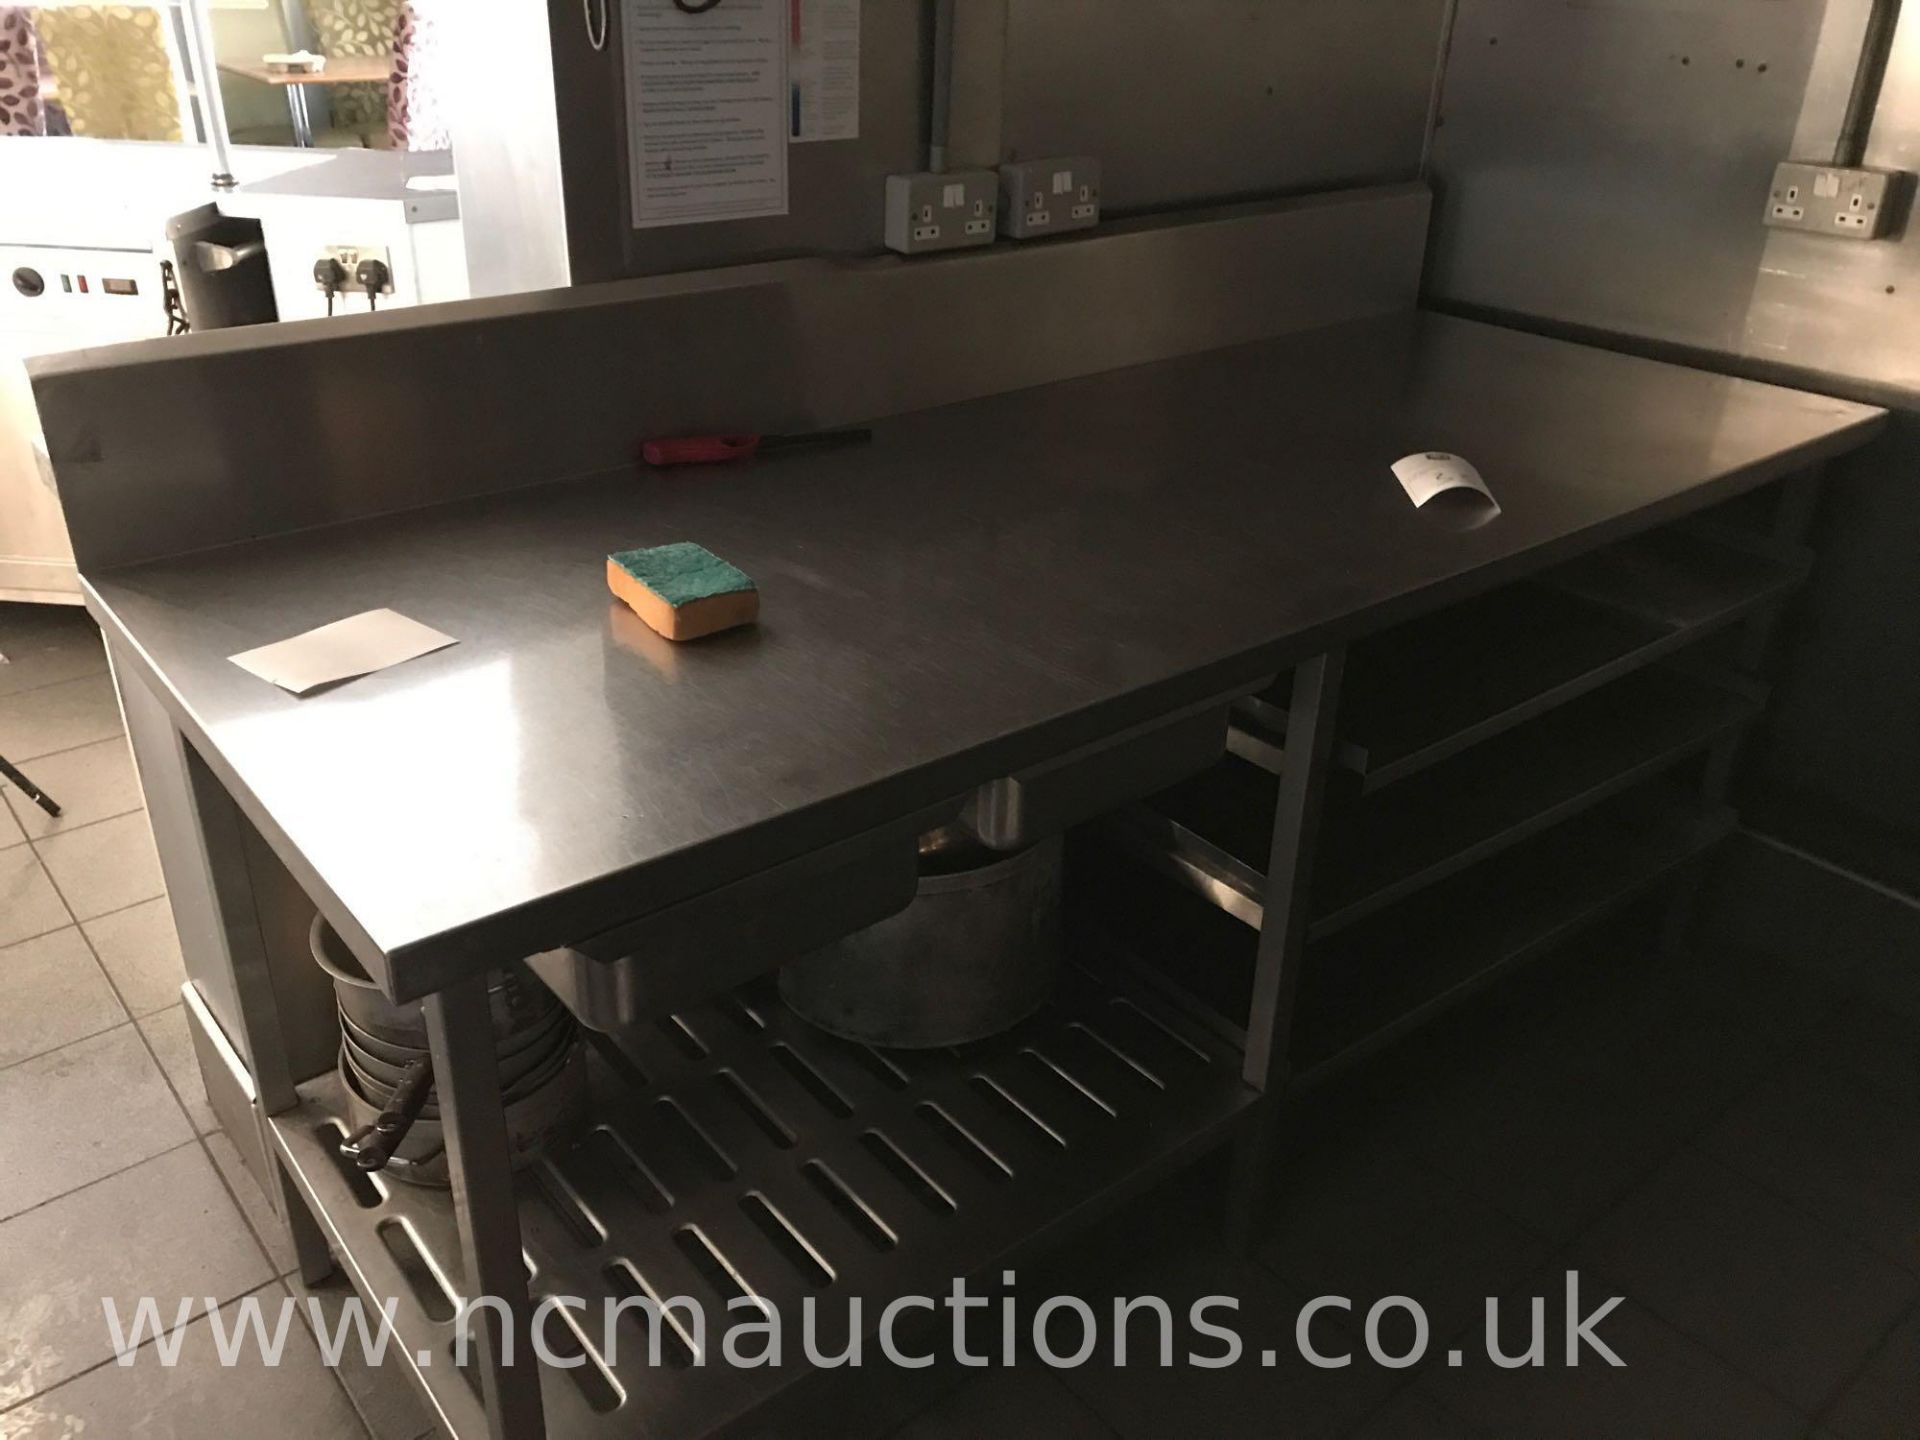 Stainless steel counter and 3x shelves